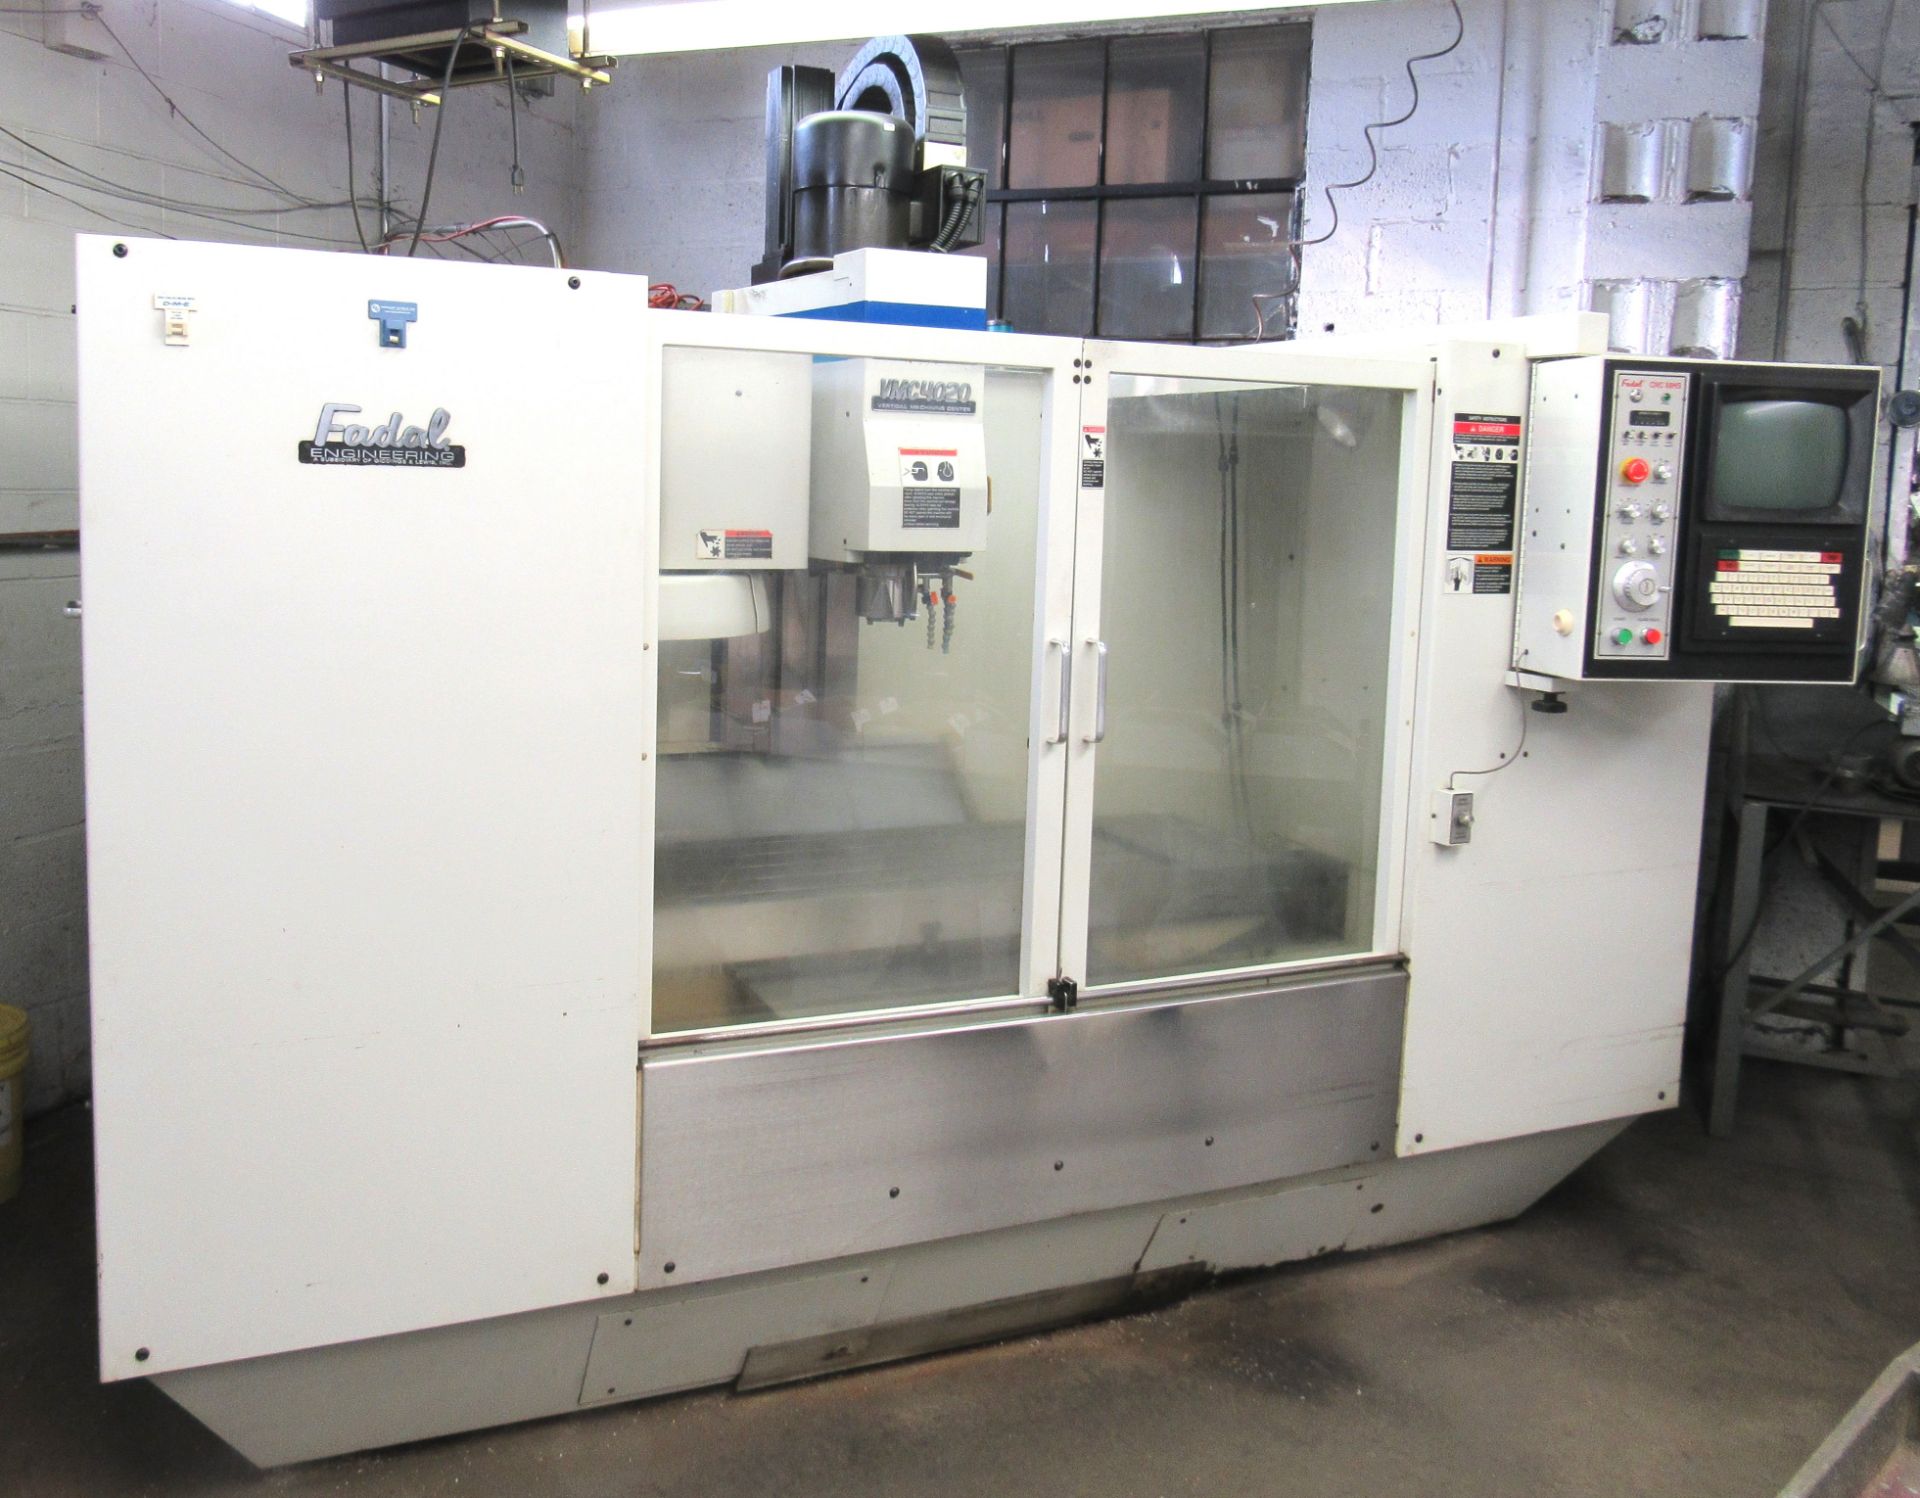 Fadal Mod.4020HT Vertical Machining Center - S/N 9703544 (1997) Spindle Speeds to 10,000 RPM, 40" - Image 4 of 4